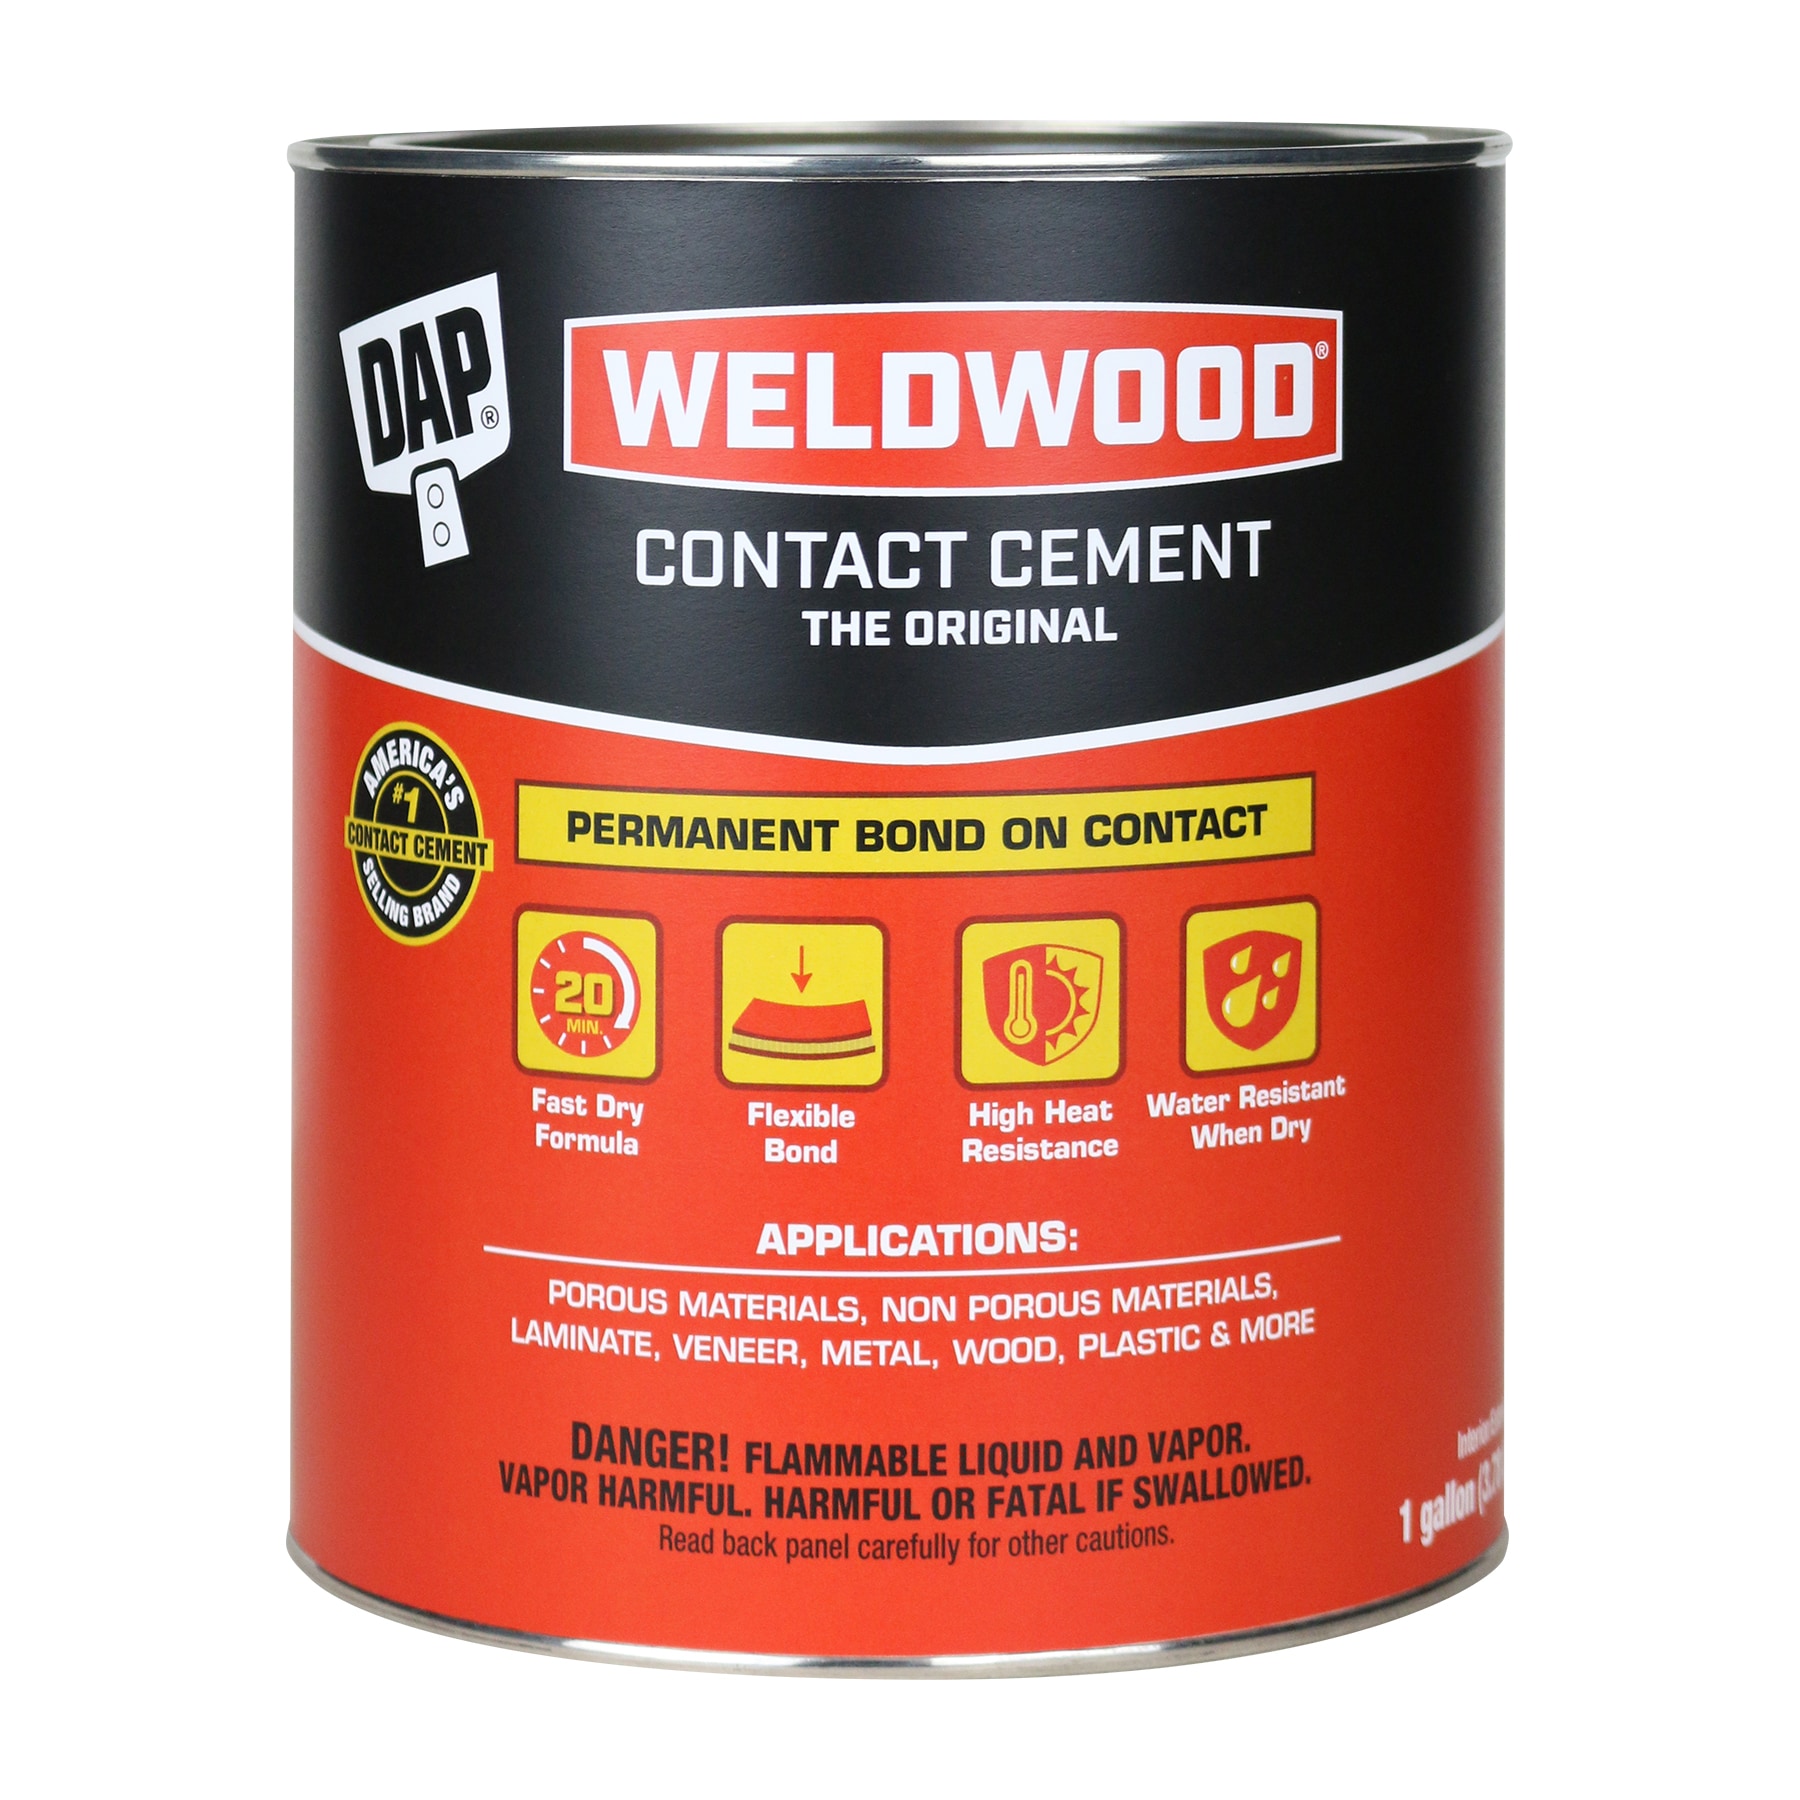 EVA Foam Roll and Contact Cement Adhesive - DAP Woodweld Cement